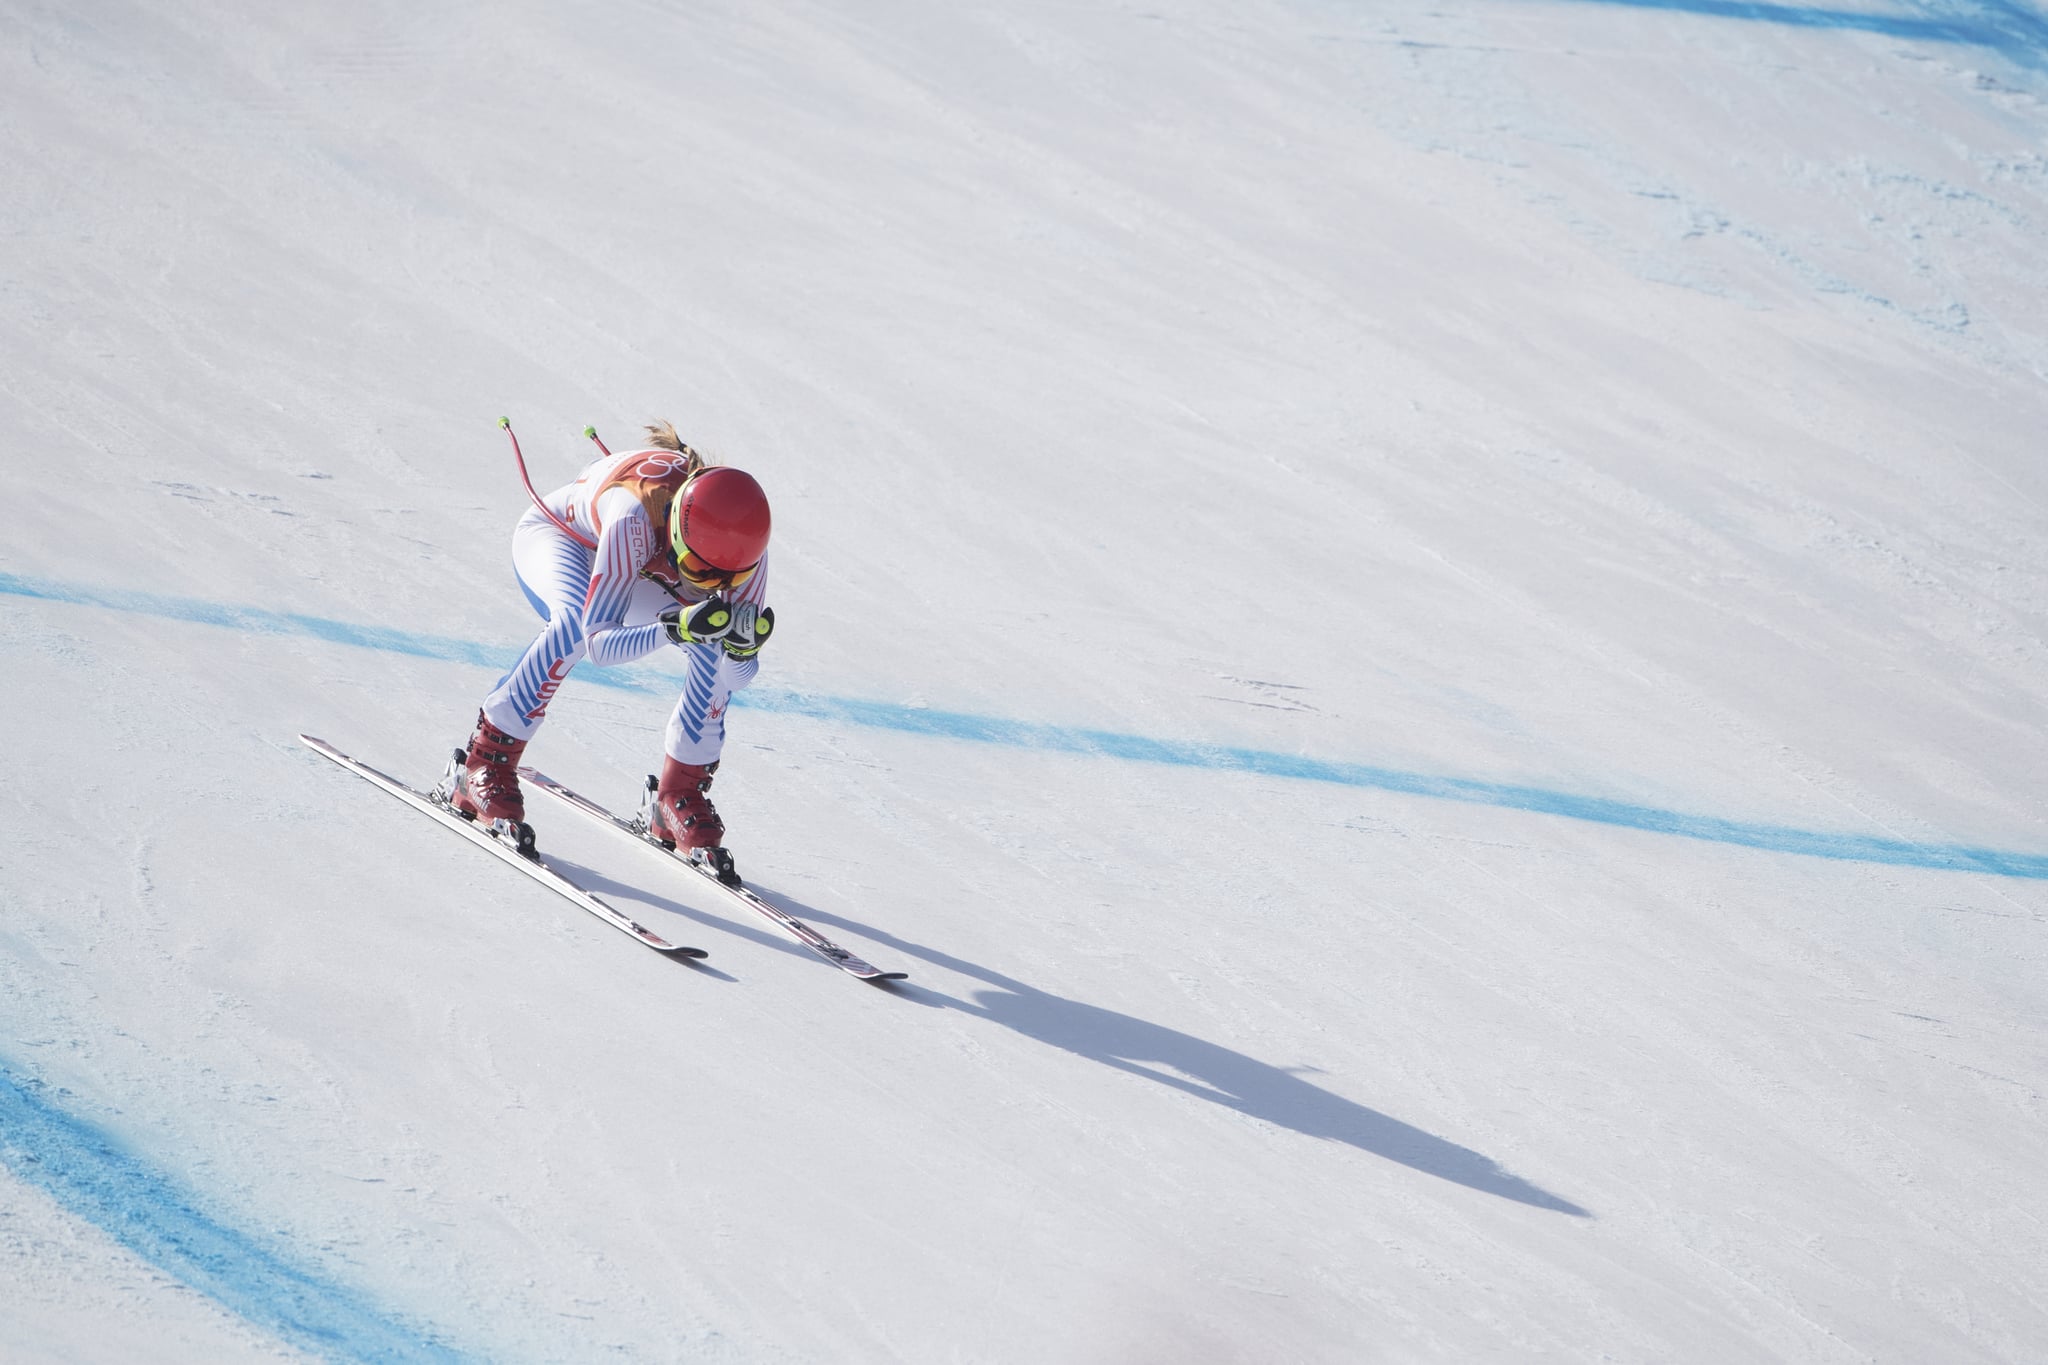 PYEONGCHANG, SOUTH KOREA -FEBRUARY 22:   Mikaela Shiffrin #19 of the United States in action during the Alpine Skiing - Ladies' Alpine Combined Downhill at Jeongseon Alpine Centre on February 22, 2018 in PyeongChang, South Korea.  (Photo by Tim Clayton/Corbis via Getty Images)